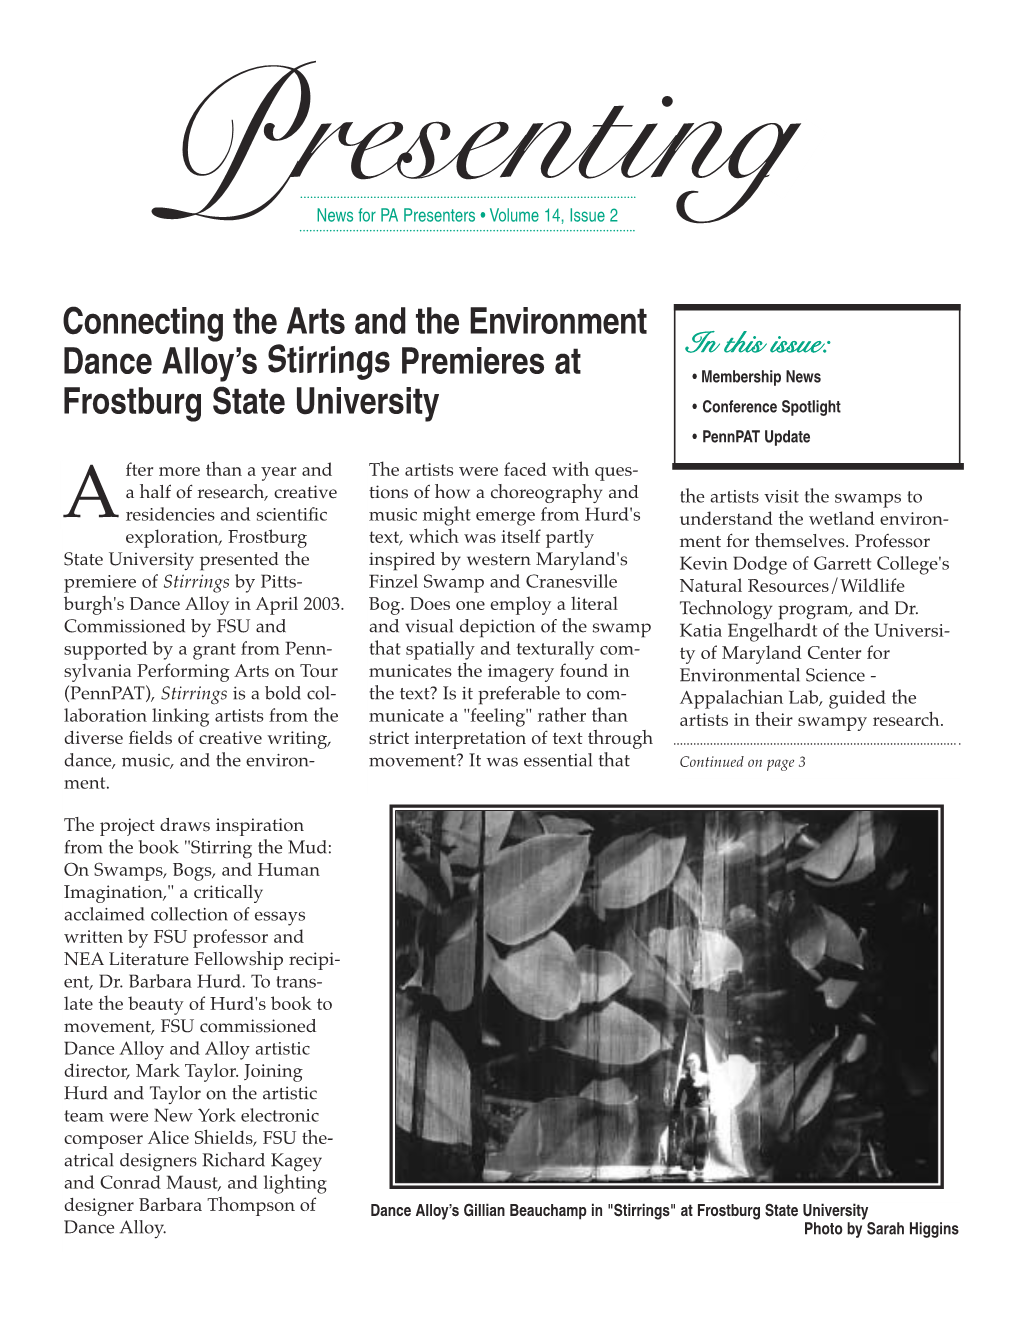 Connecting the Arts and the Environment Dance Alloy's Stirrings